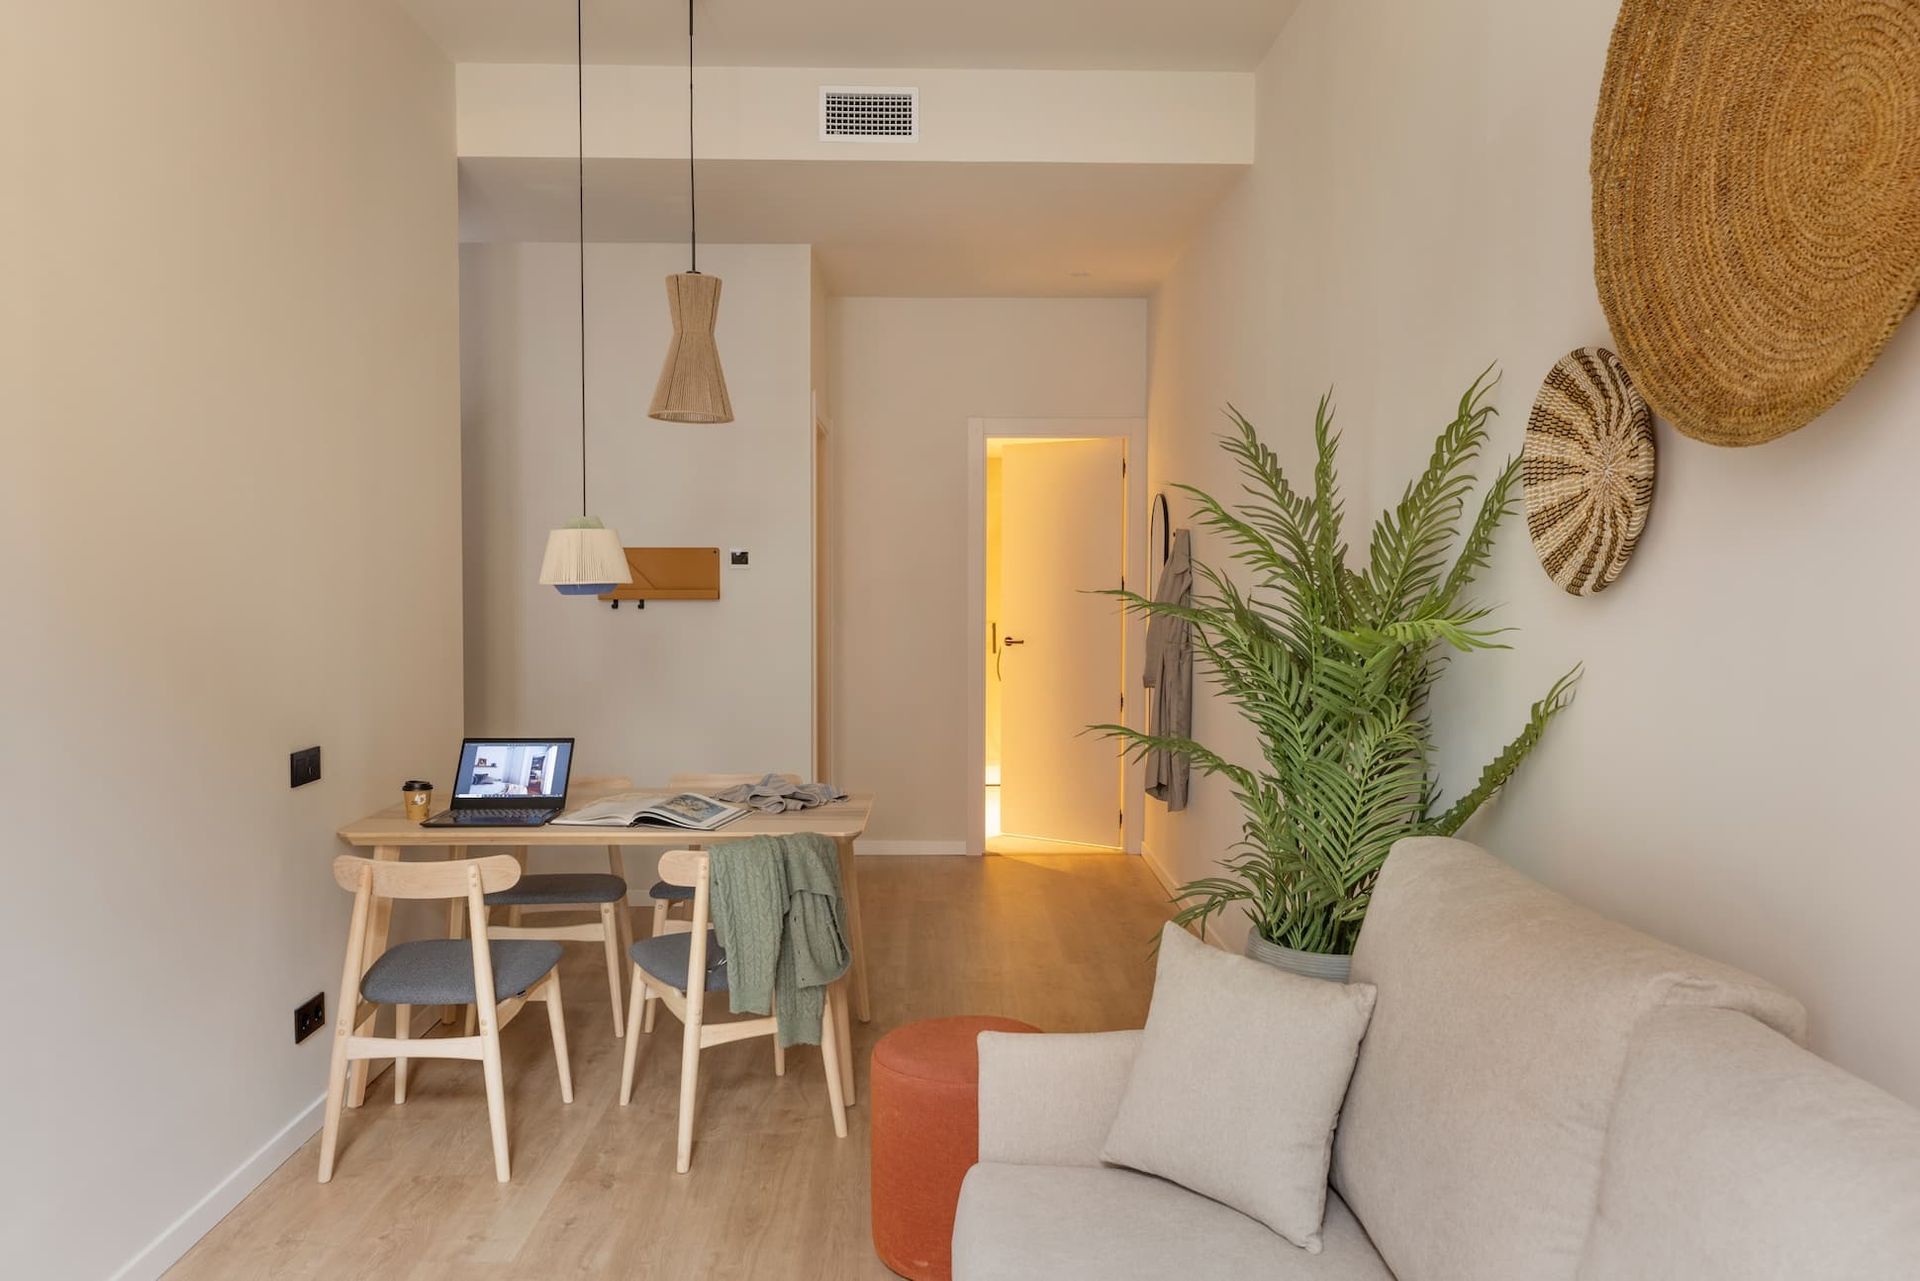 1 bedroom apartment with terrace in Barcelona Sant Antoni (pax 3)